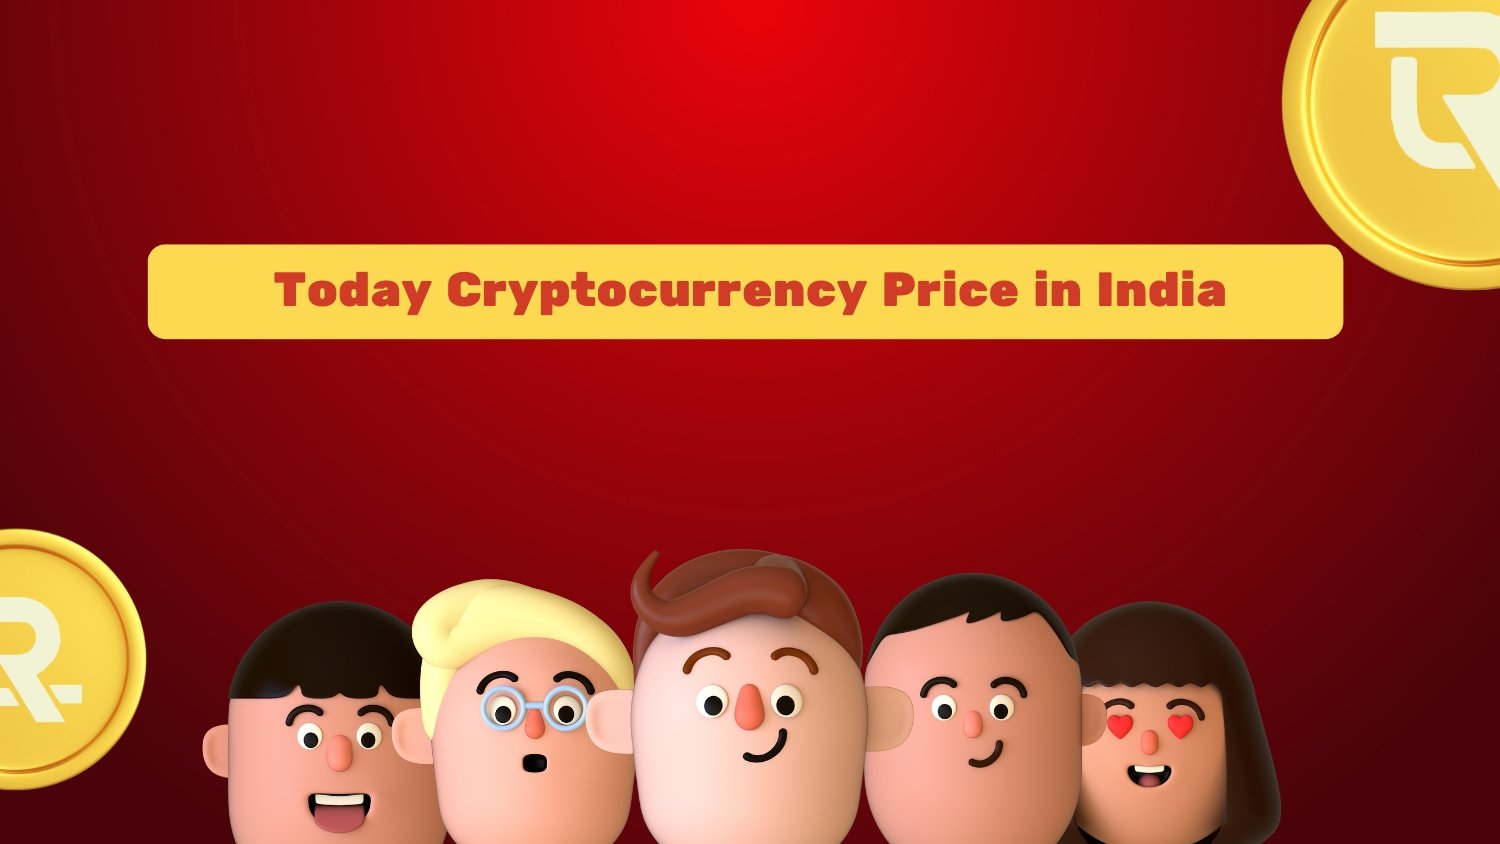 RBC-Today Cryptocurrency Price in India